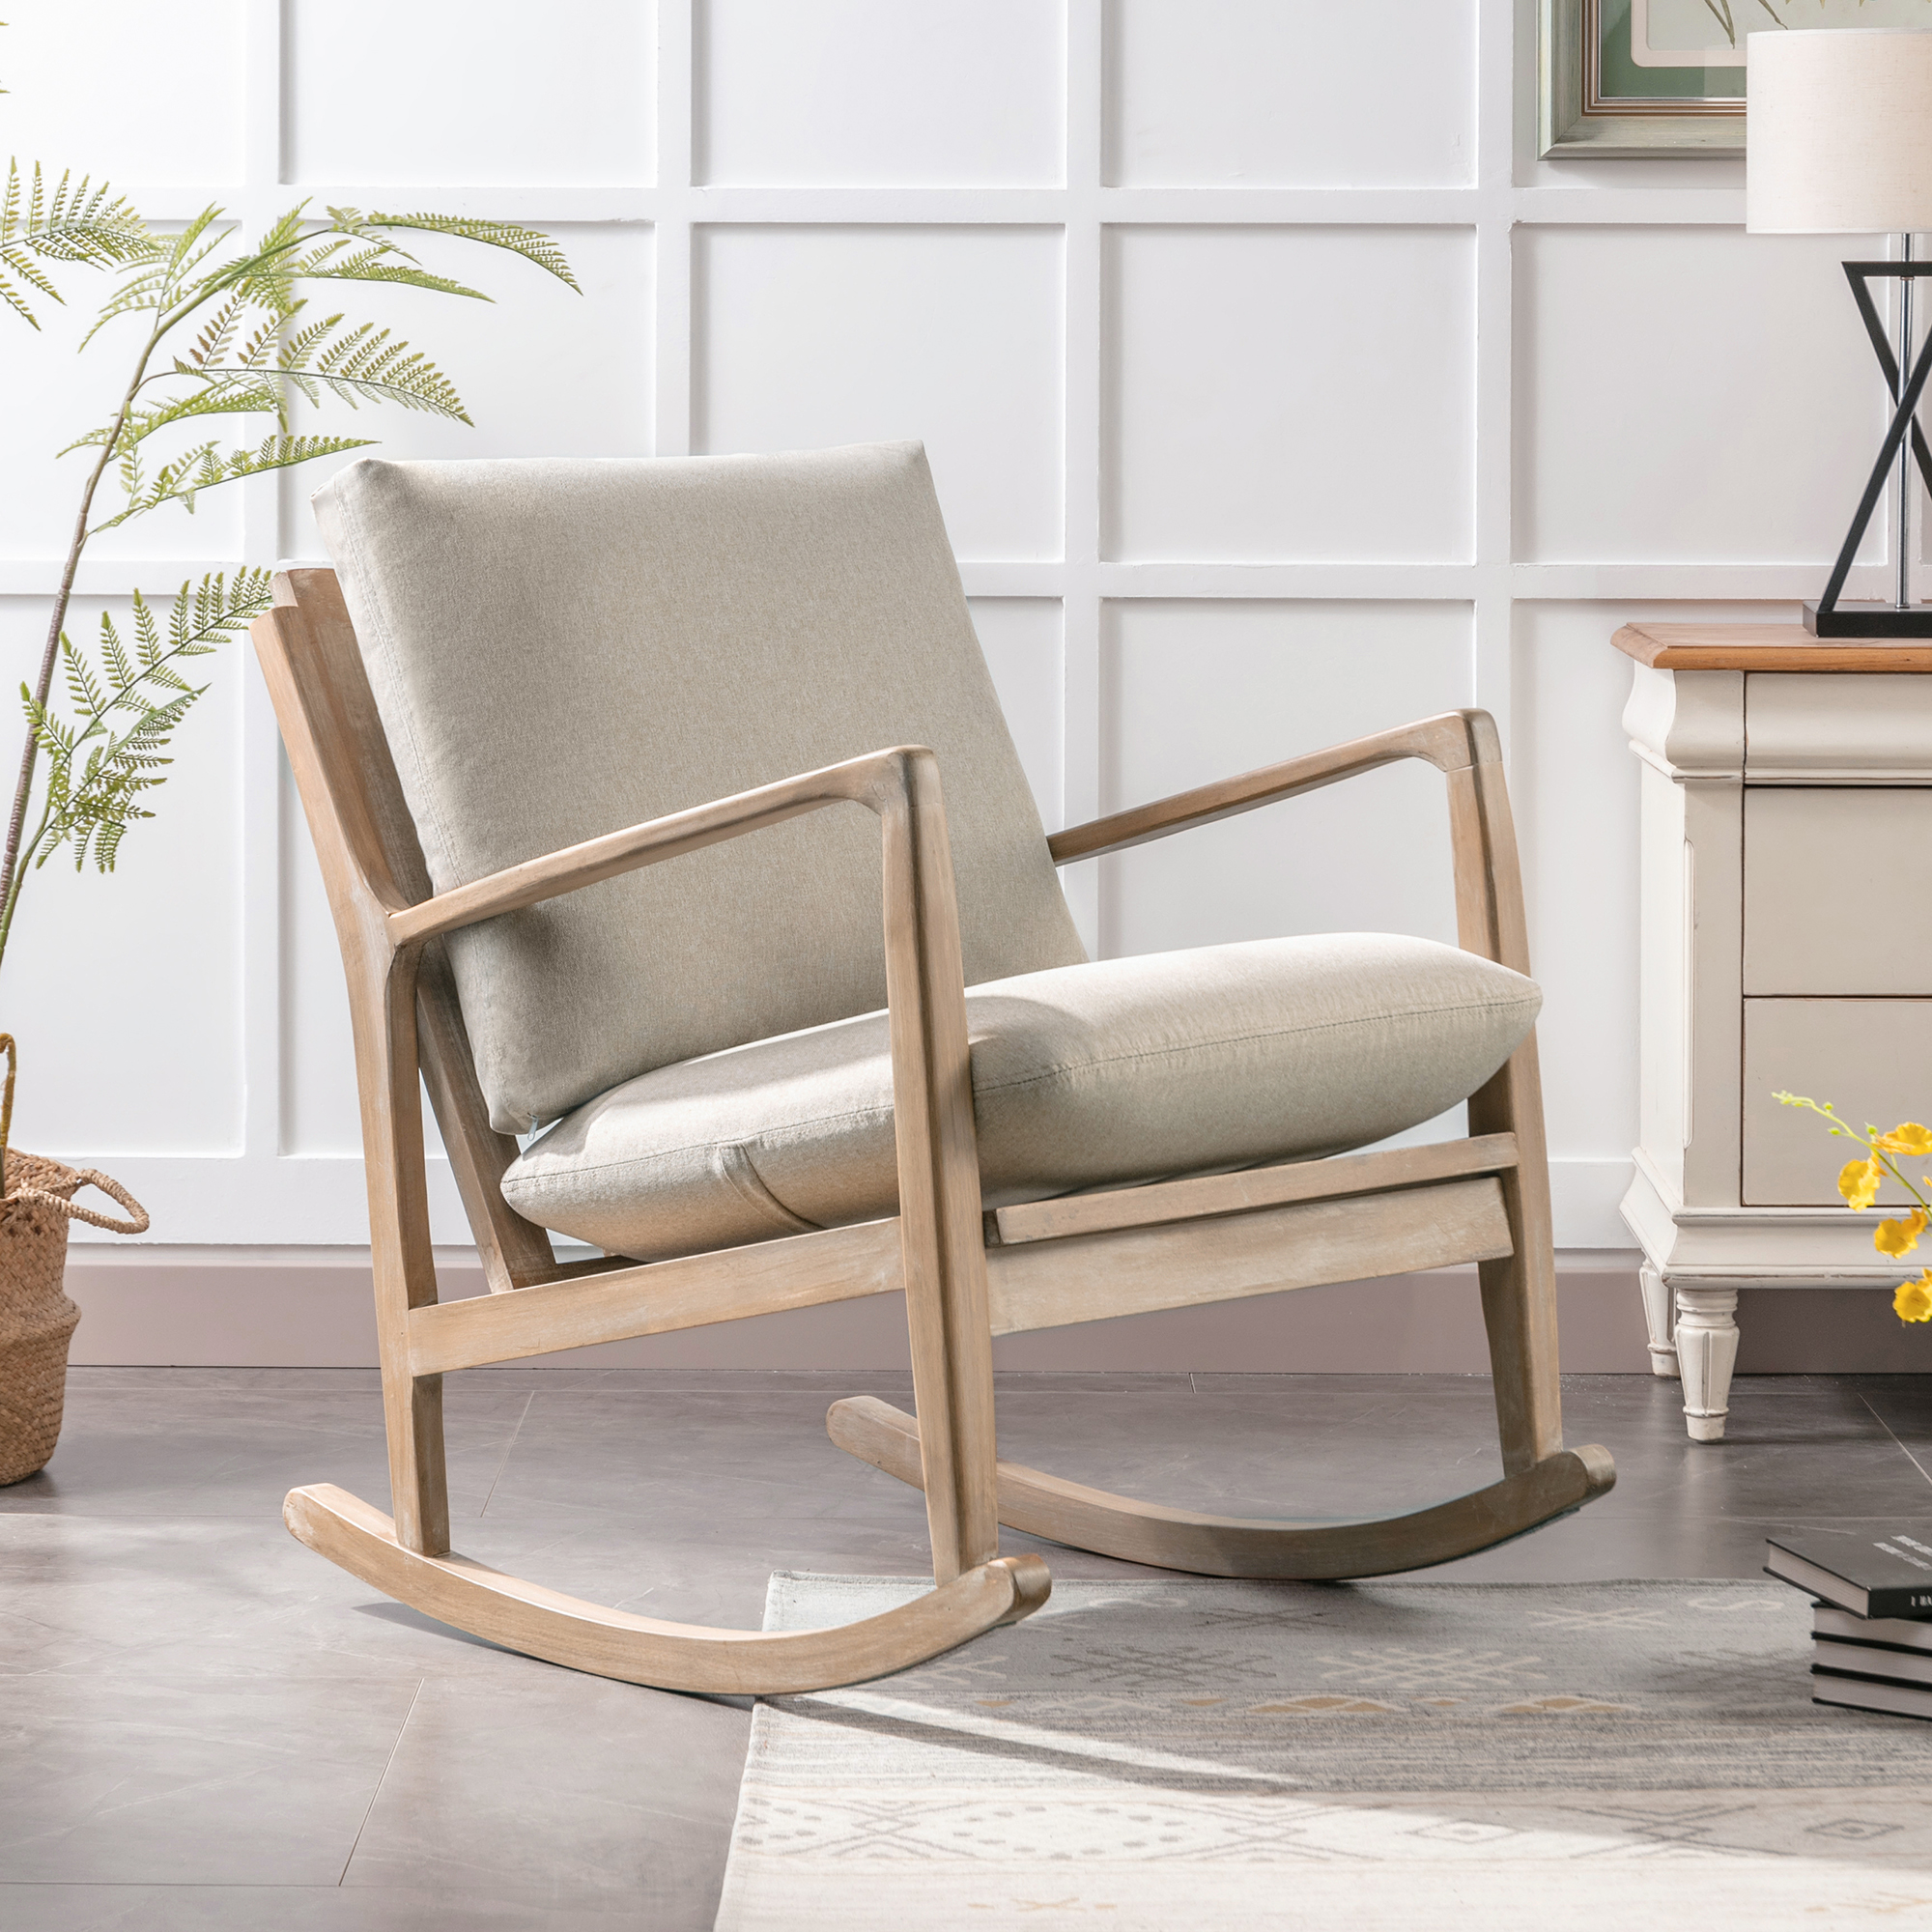 Solid Wood Rocking Chair, Linen Fabric Upholstered Comfy Accent Chair for Porch, Garden Patio, Balcony, Living Room and Bedroom, Beige - image 2 of 9